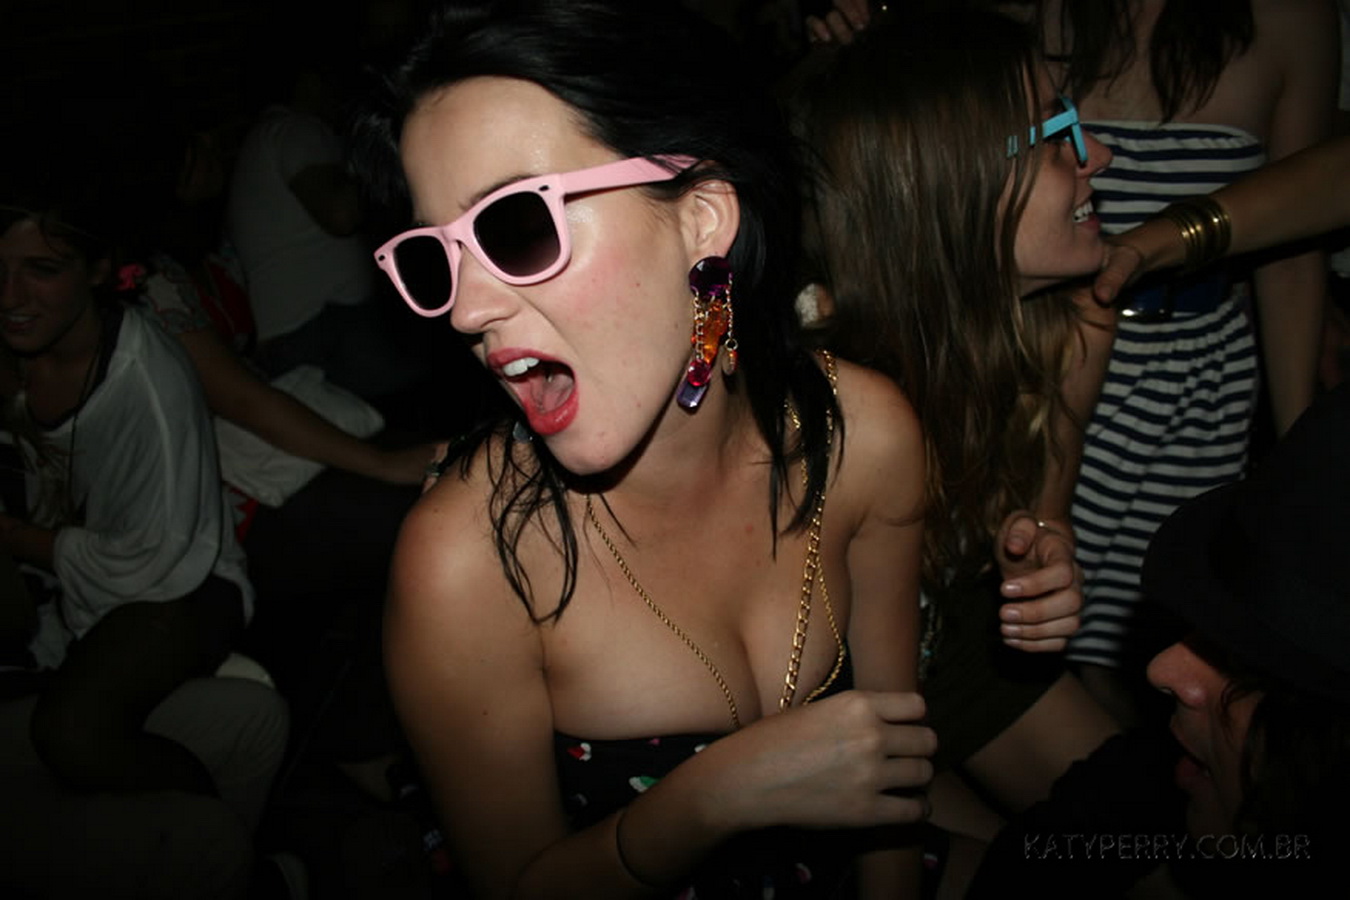 Katy_Perry_bobsslip_drunk_cleavage_downblouse_upskirt_nipslip_at_her_birthday_2007_party_99x_HQ_37.jpg